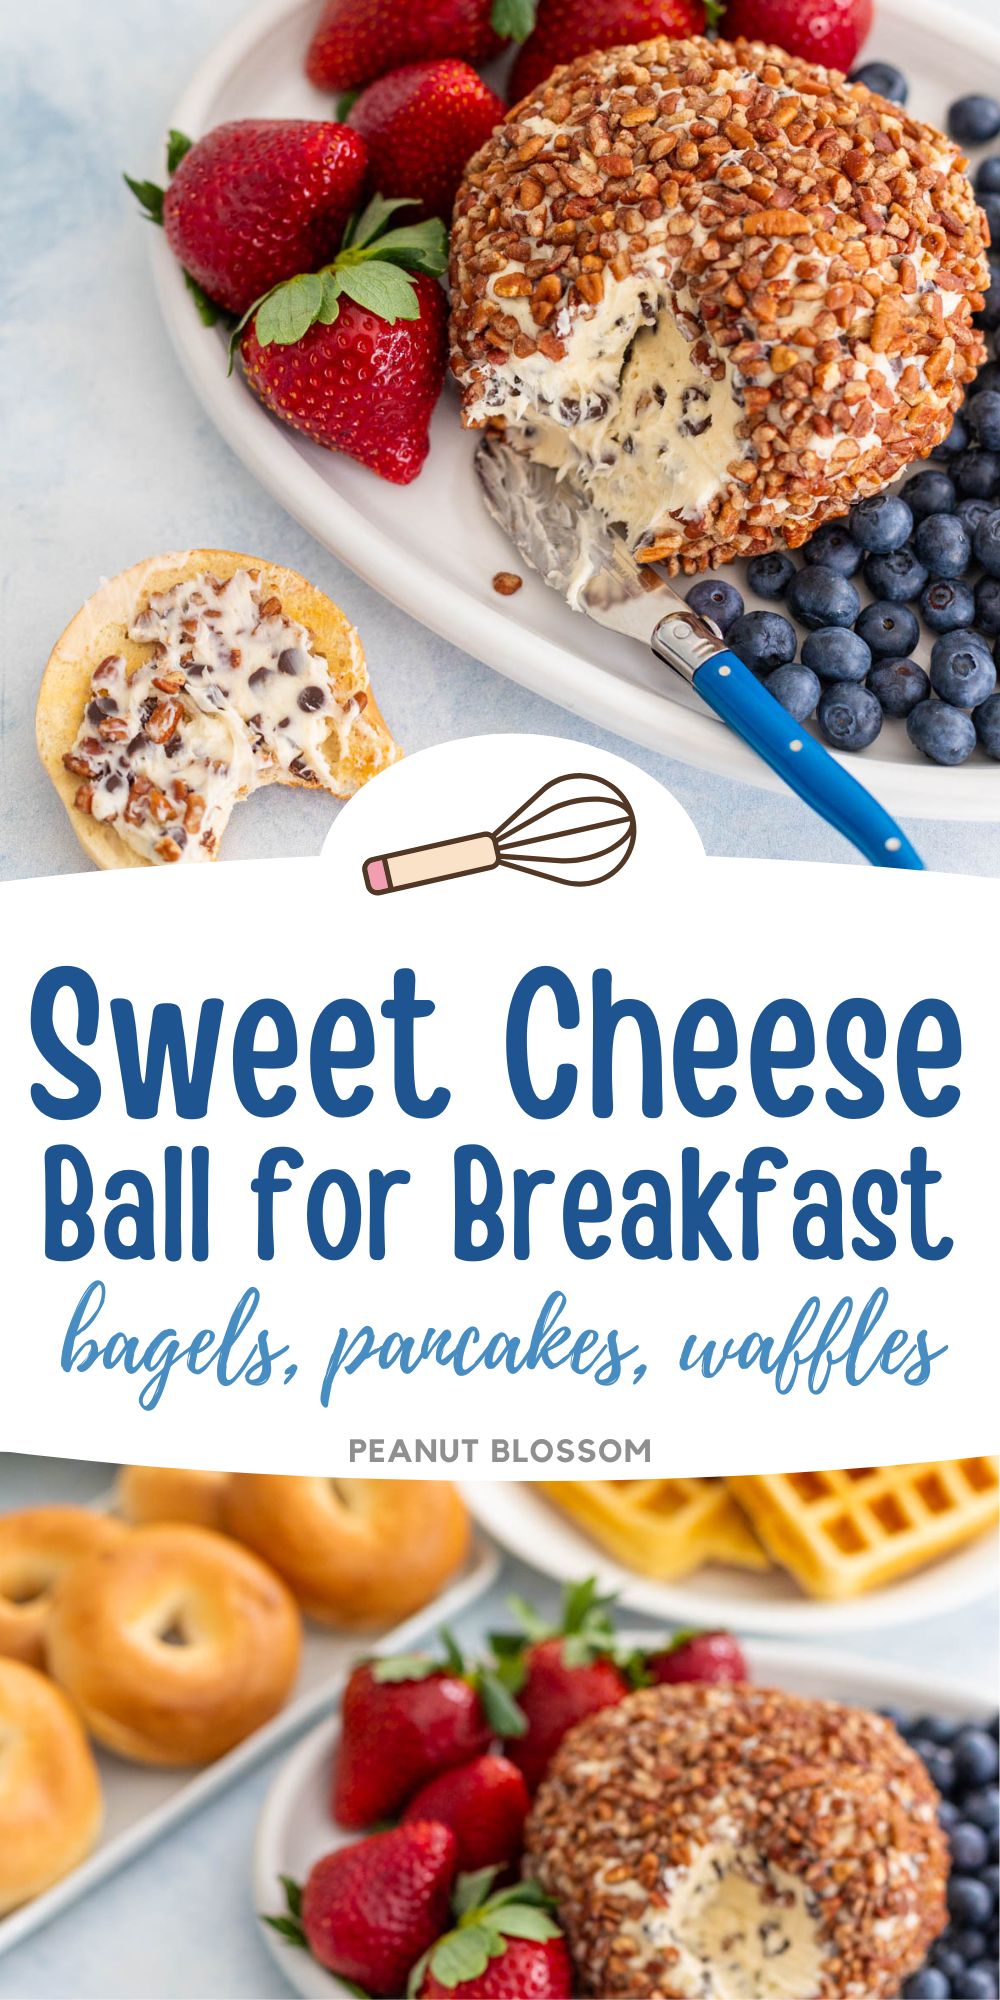 The photo collage shows the chocolate chip cheese ball in a breakfast spread with bagels and waffles.